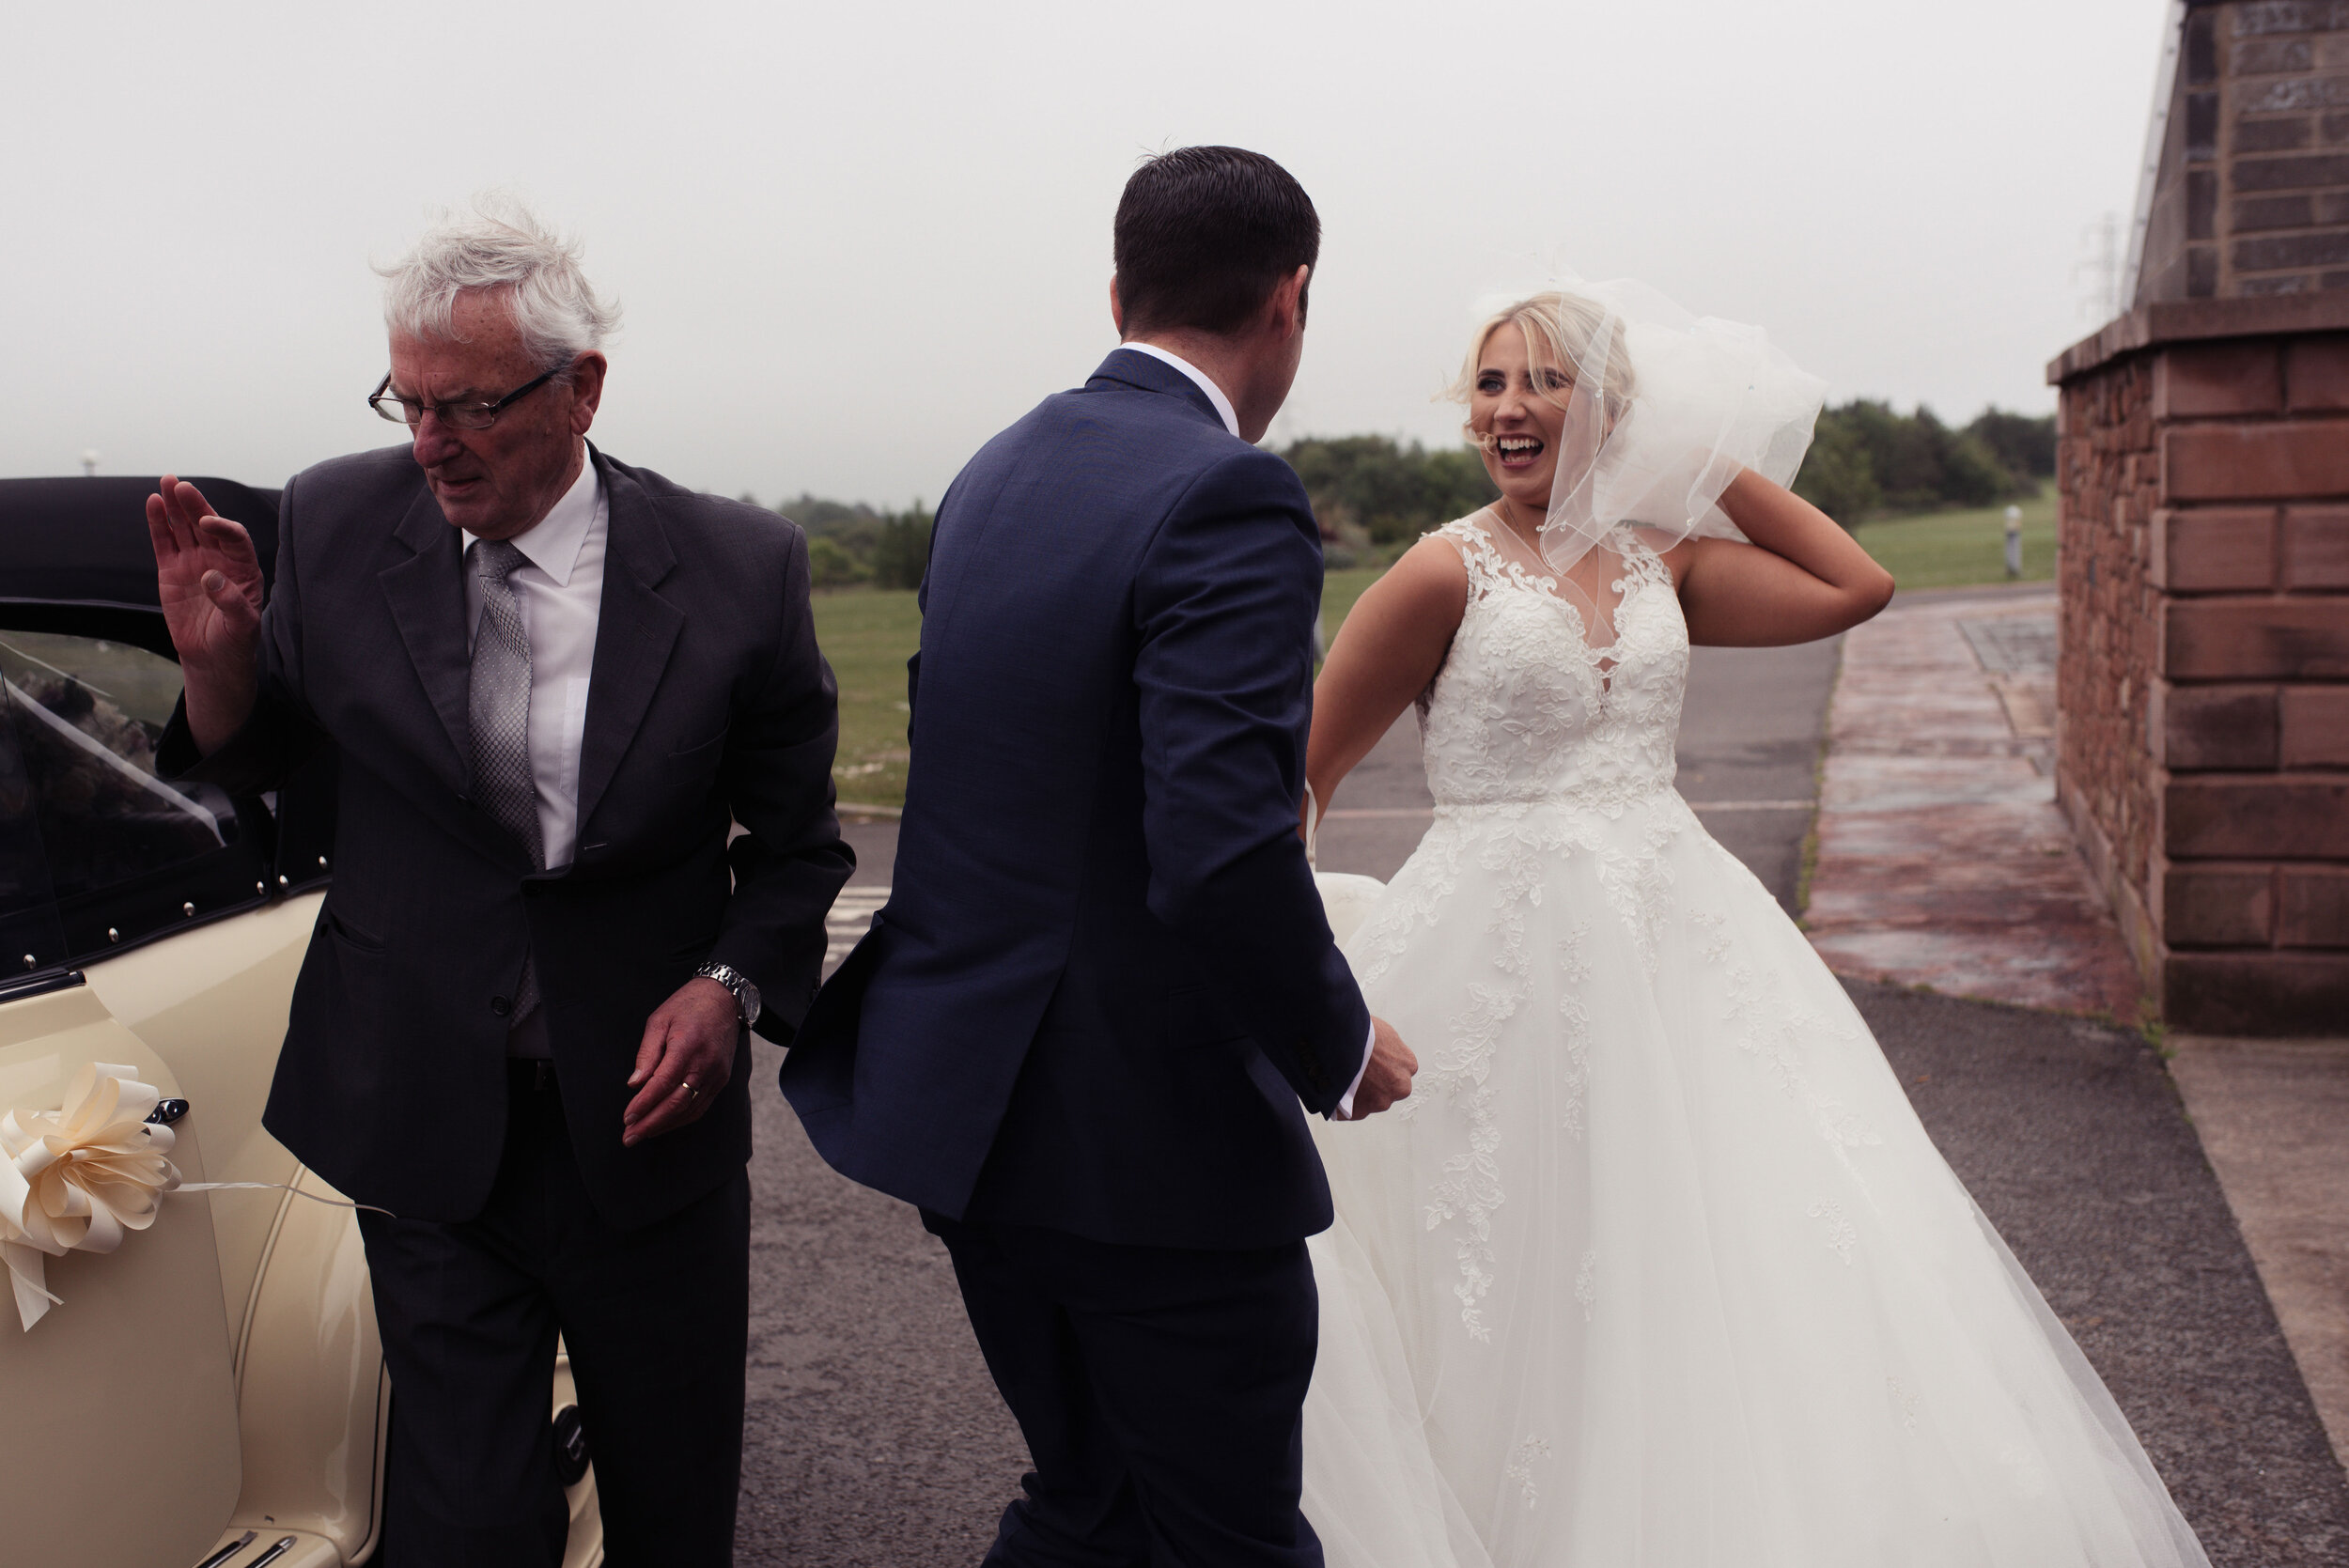 The bride and groom arrive at Whitehaven golf club